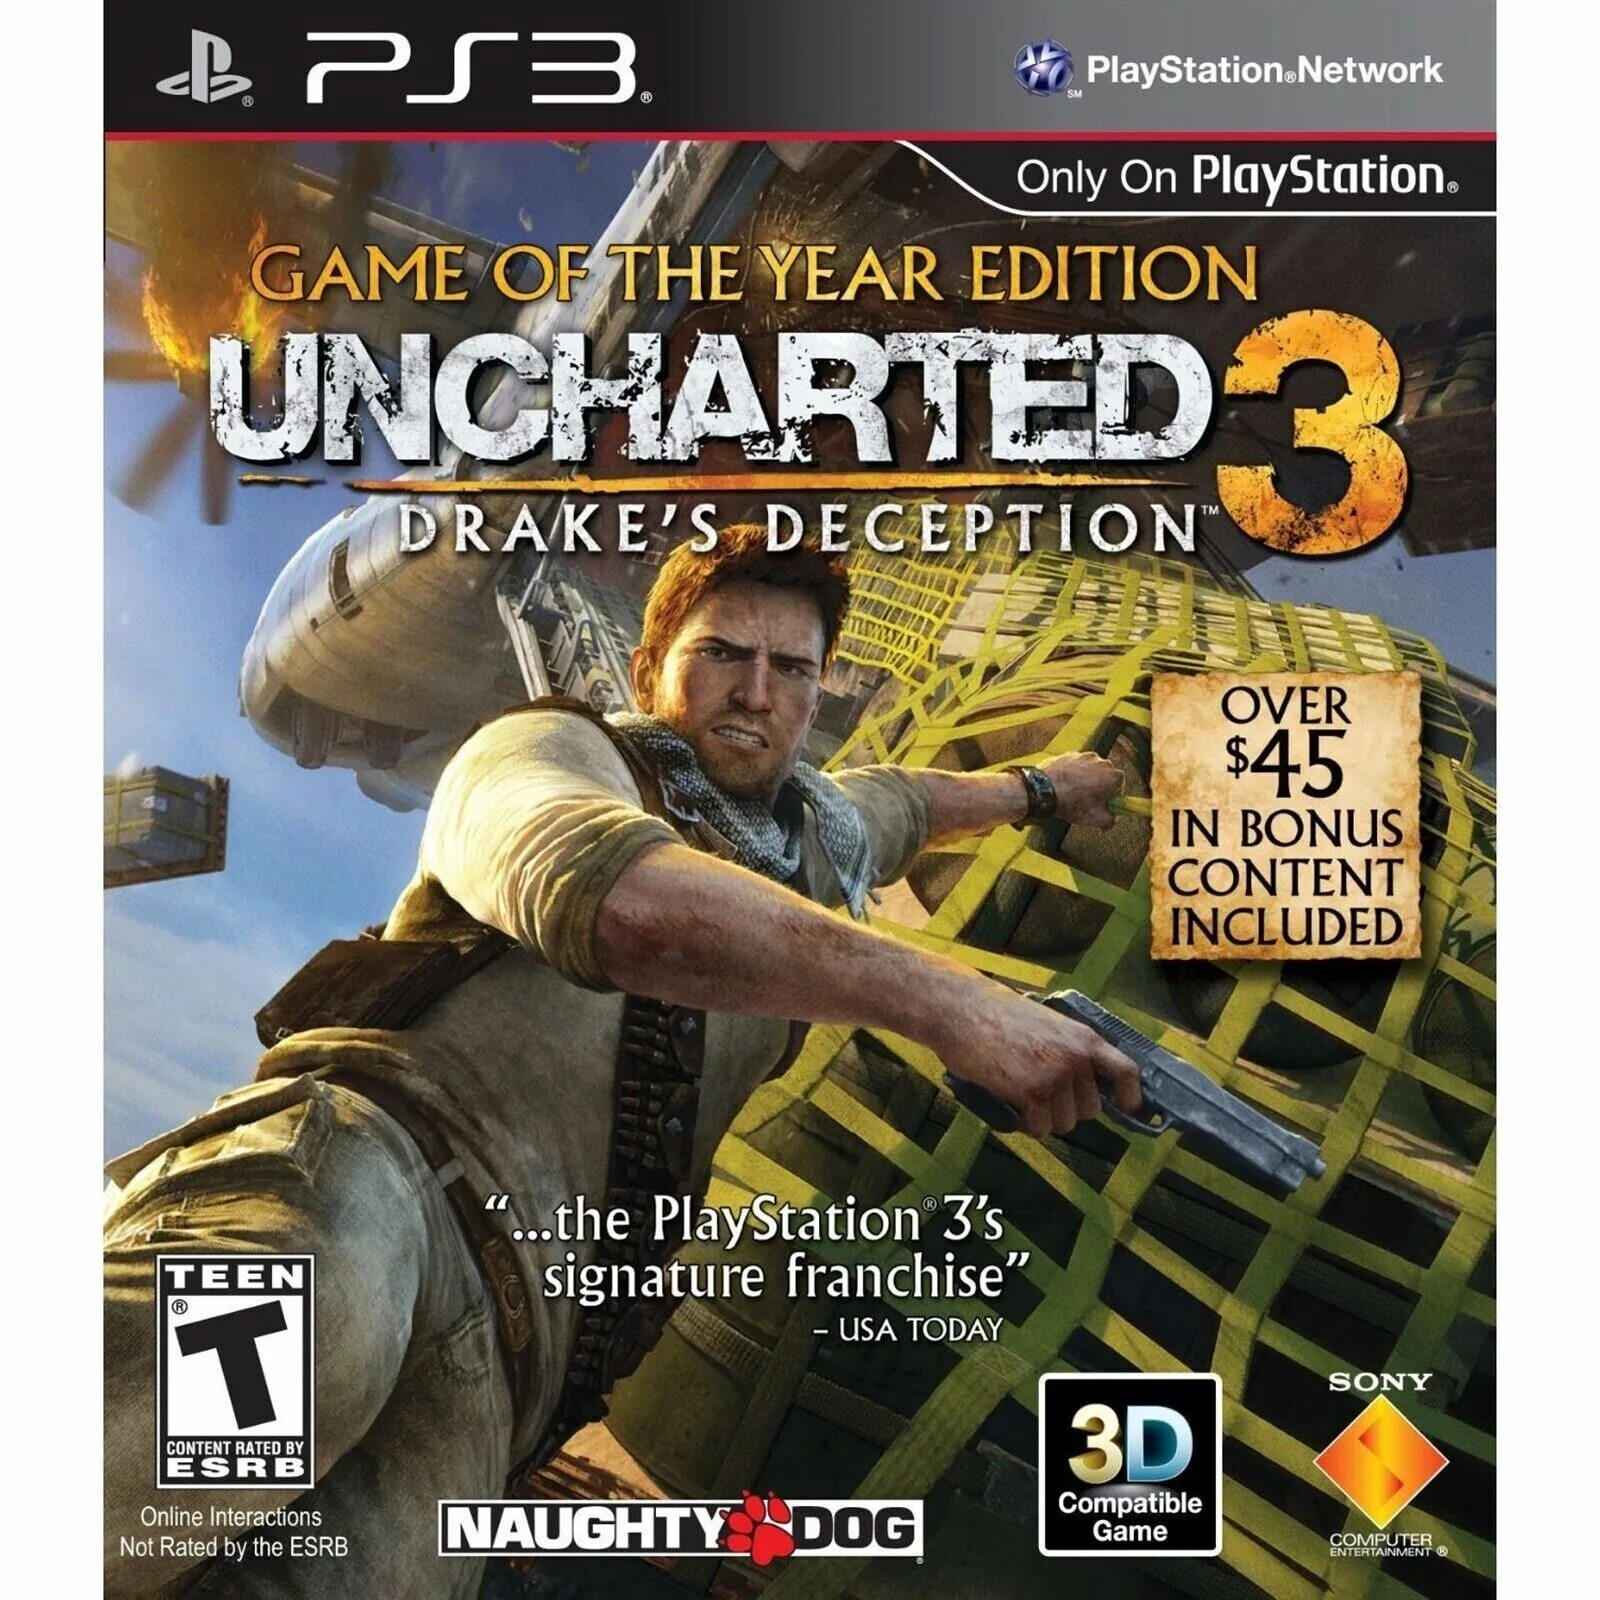 Uncharted 3 ps3. Uncharted игра на пс3. Uncharted 3 иллюзии Дрейка ps3. Uncharted 3 ps3 диск. Game of the year игры